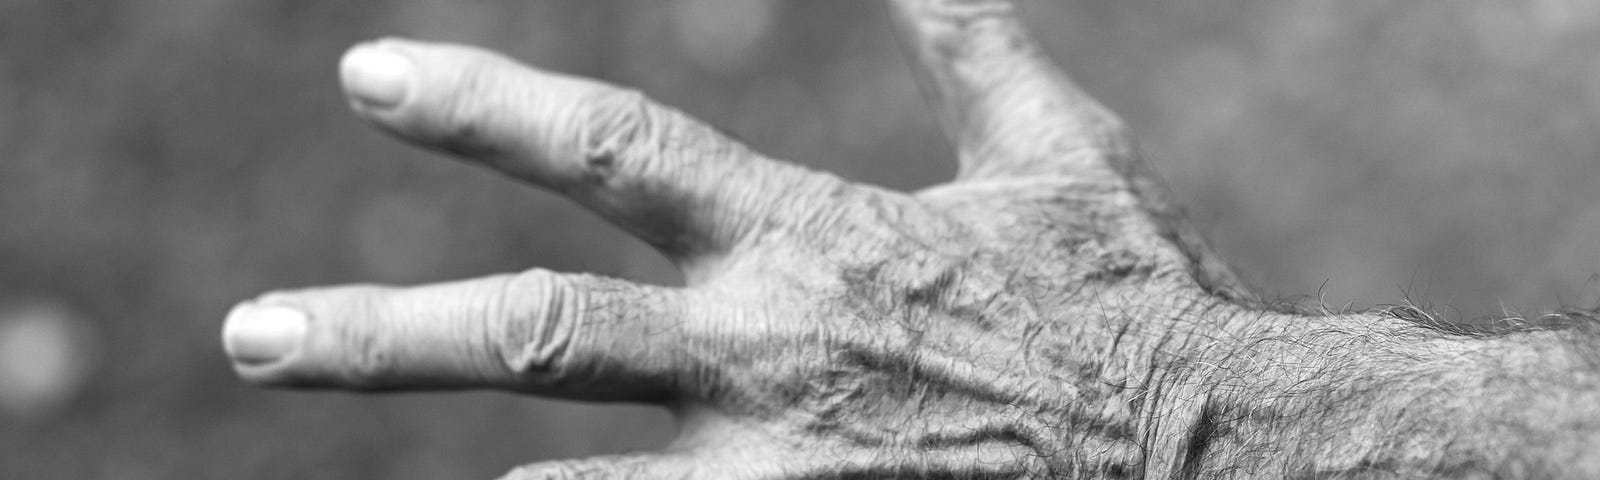 Black and white photo of an elderly woman’s hand.